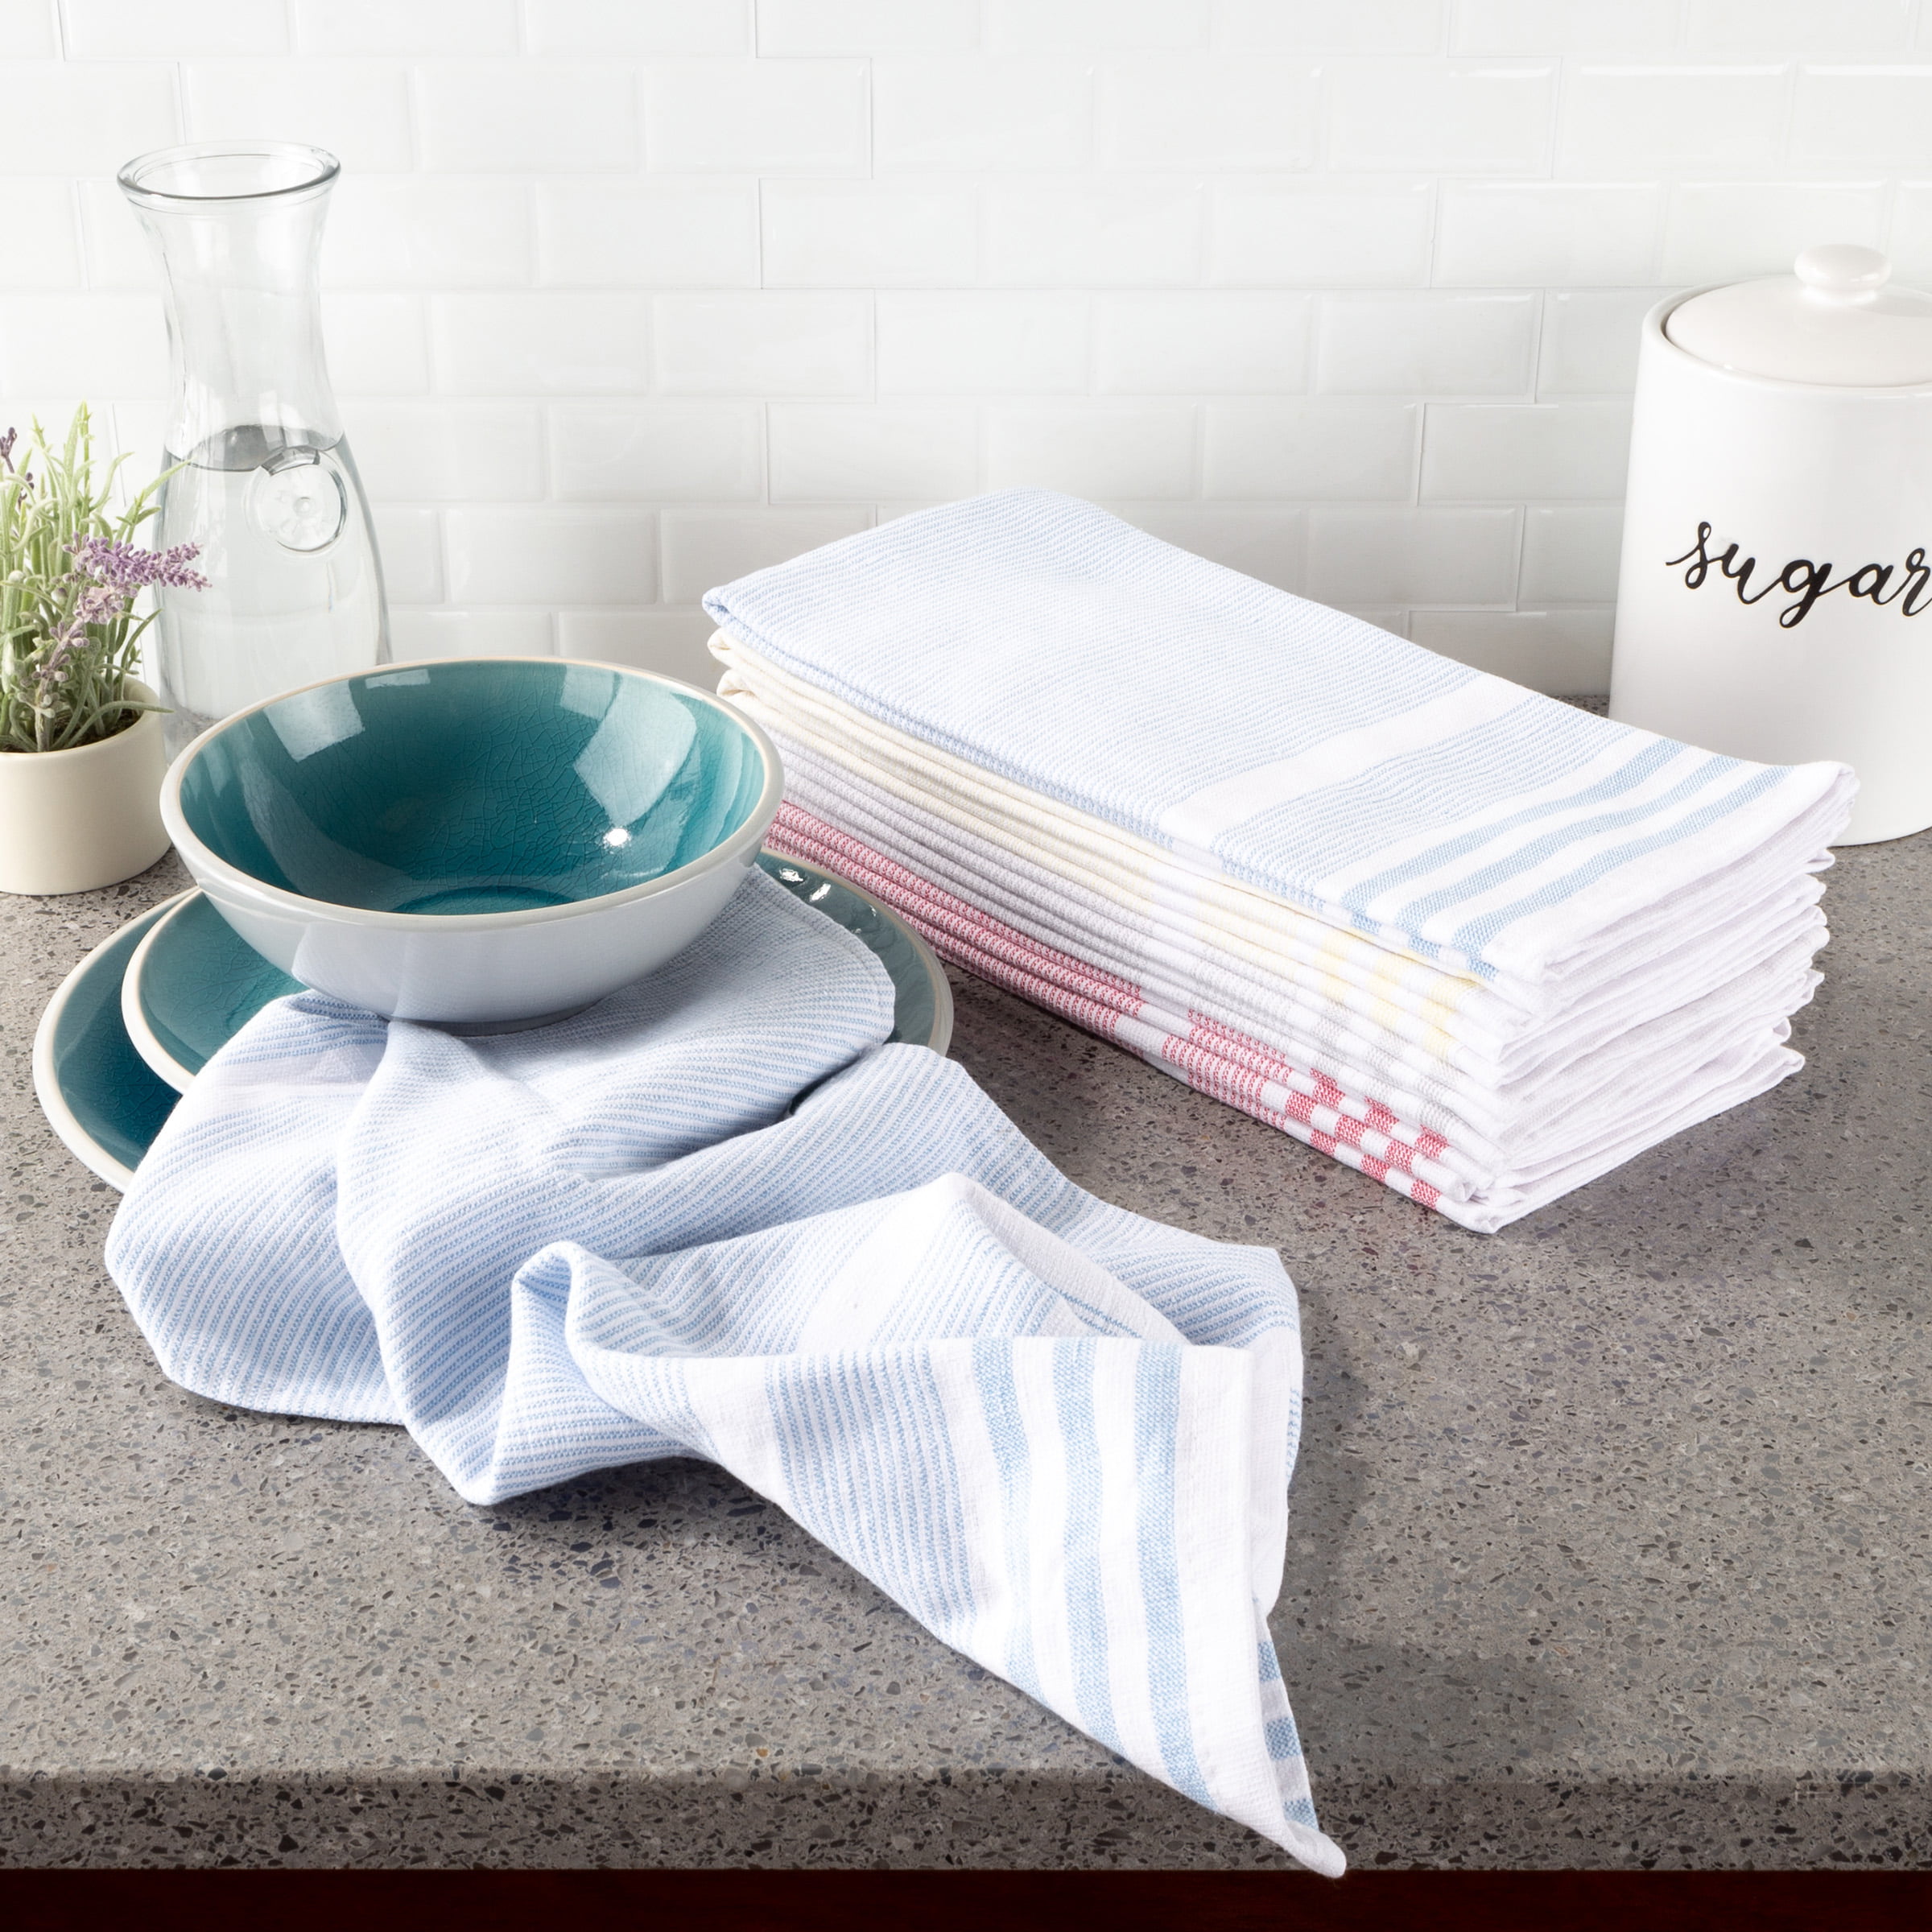 Reviewed: Chic & Functional: Urban Villa Kitchen Towels Review